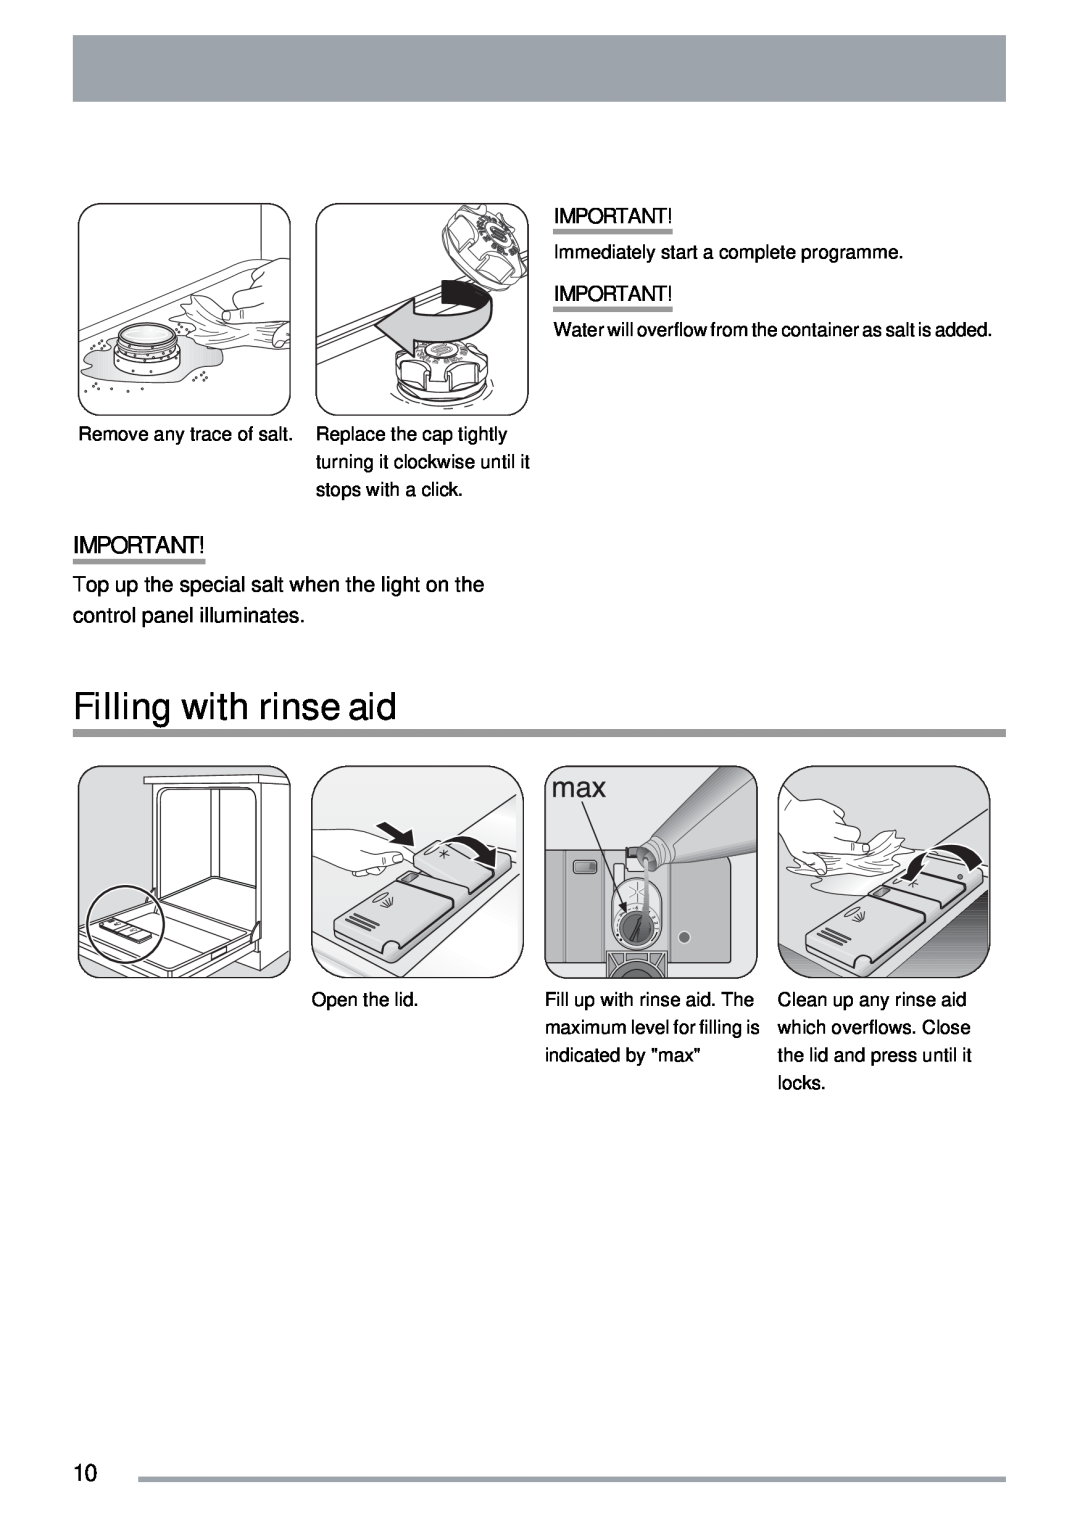 Zanussi ZDI 122 user manual Filling with rinse aid, Immediately start a complete programme, Open the lid, indicated by max 